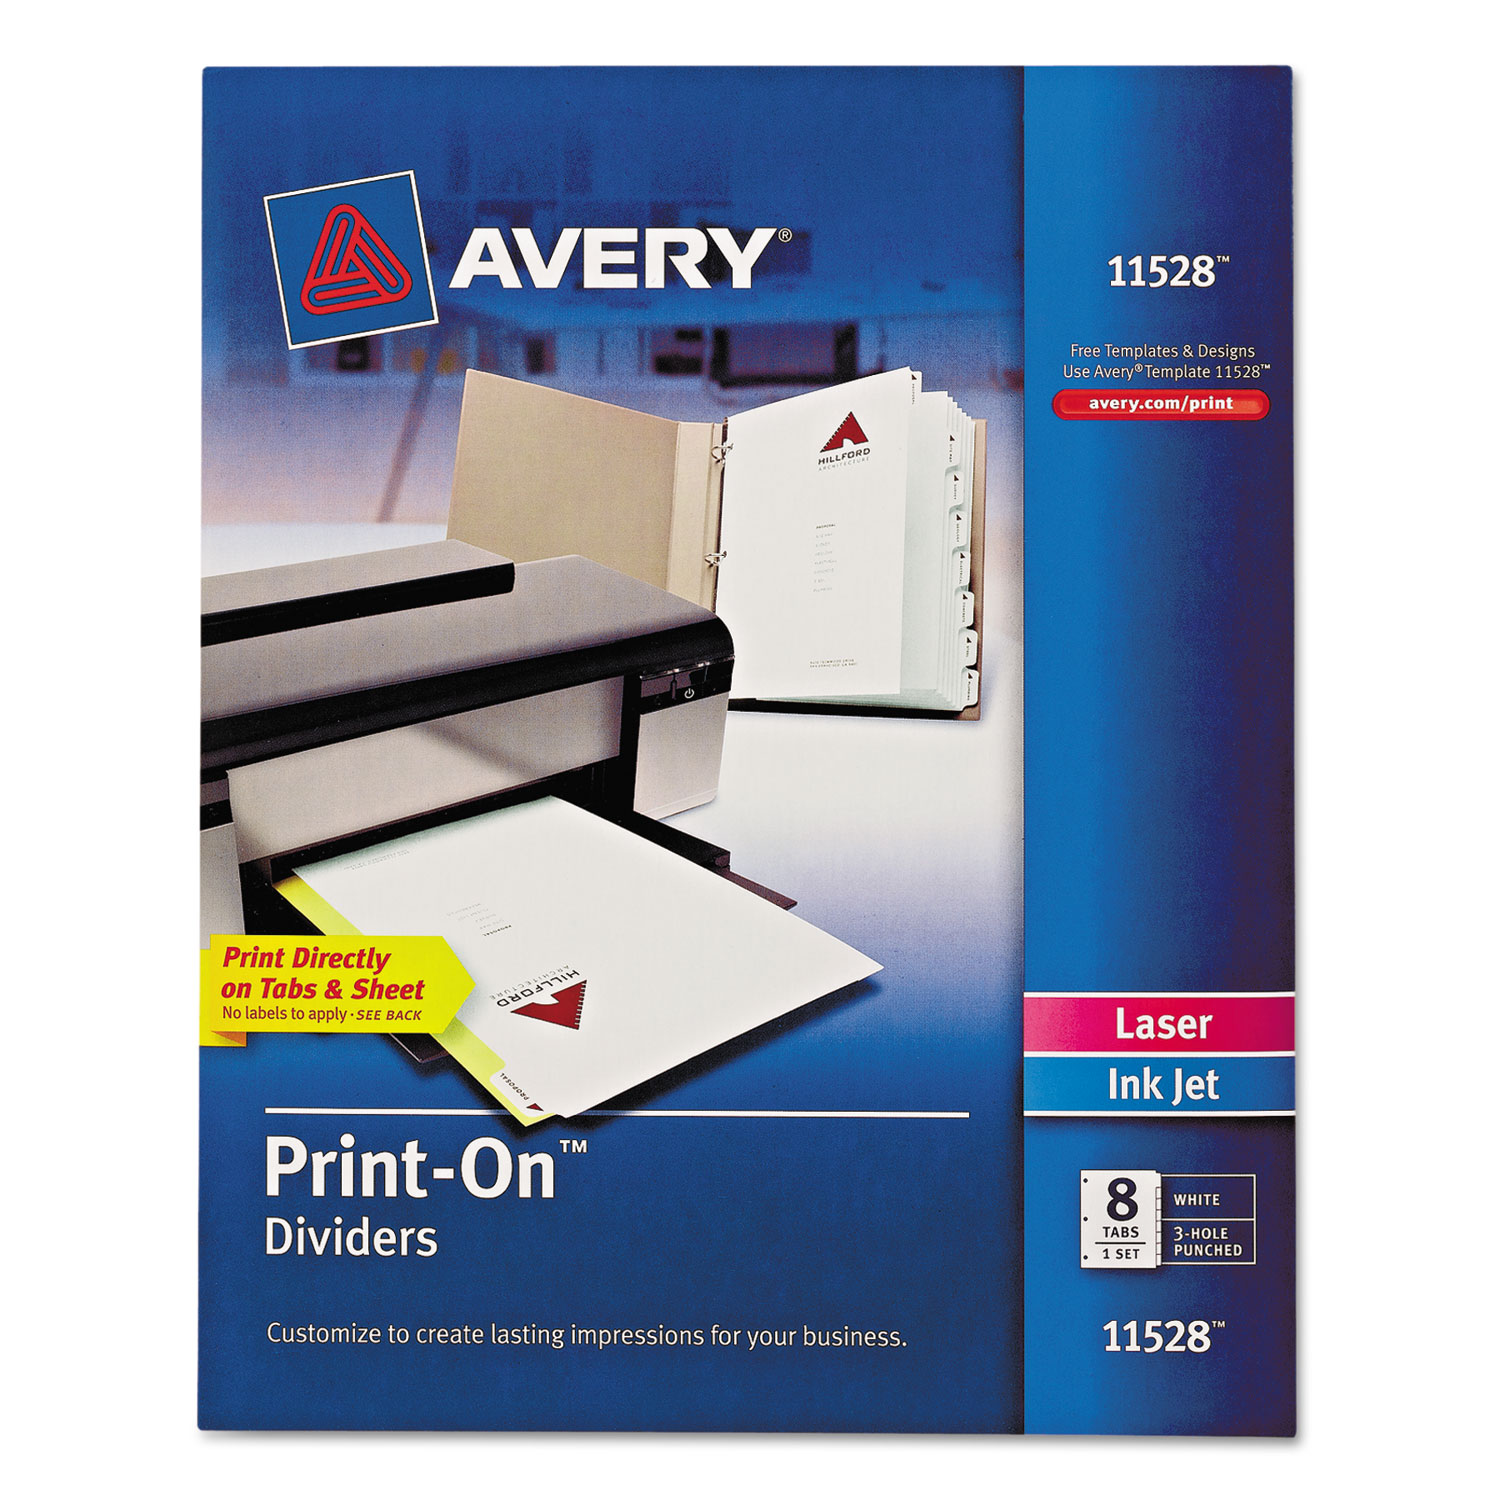  Avery 11528 Customizable Print-On Dividers, 8-Tab, Letter (AVE11528) 